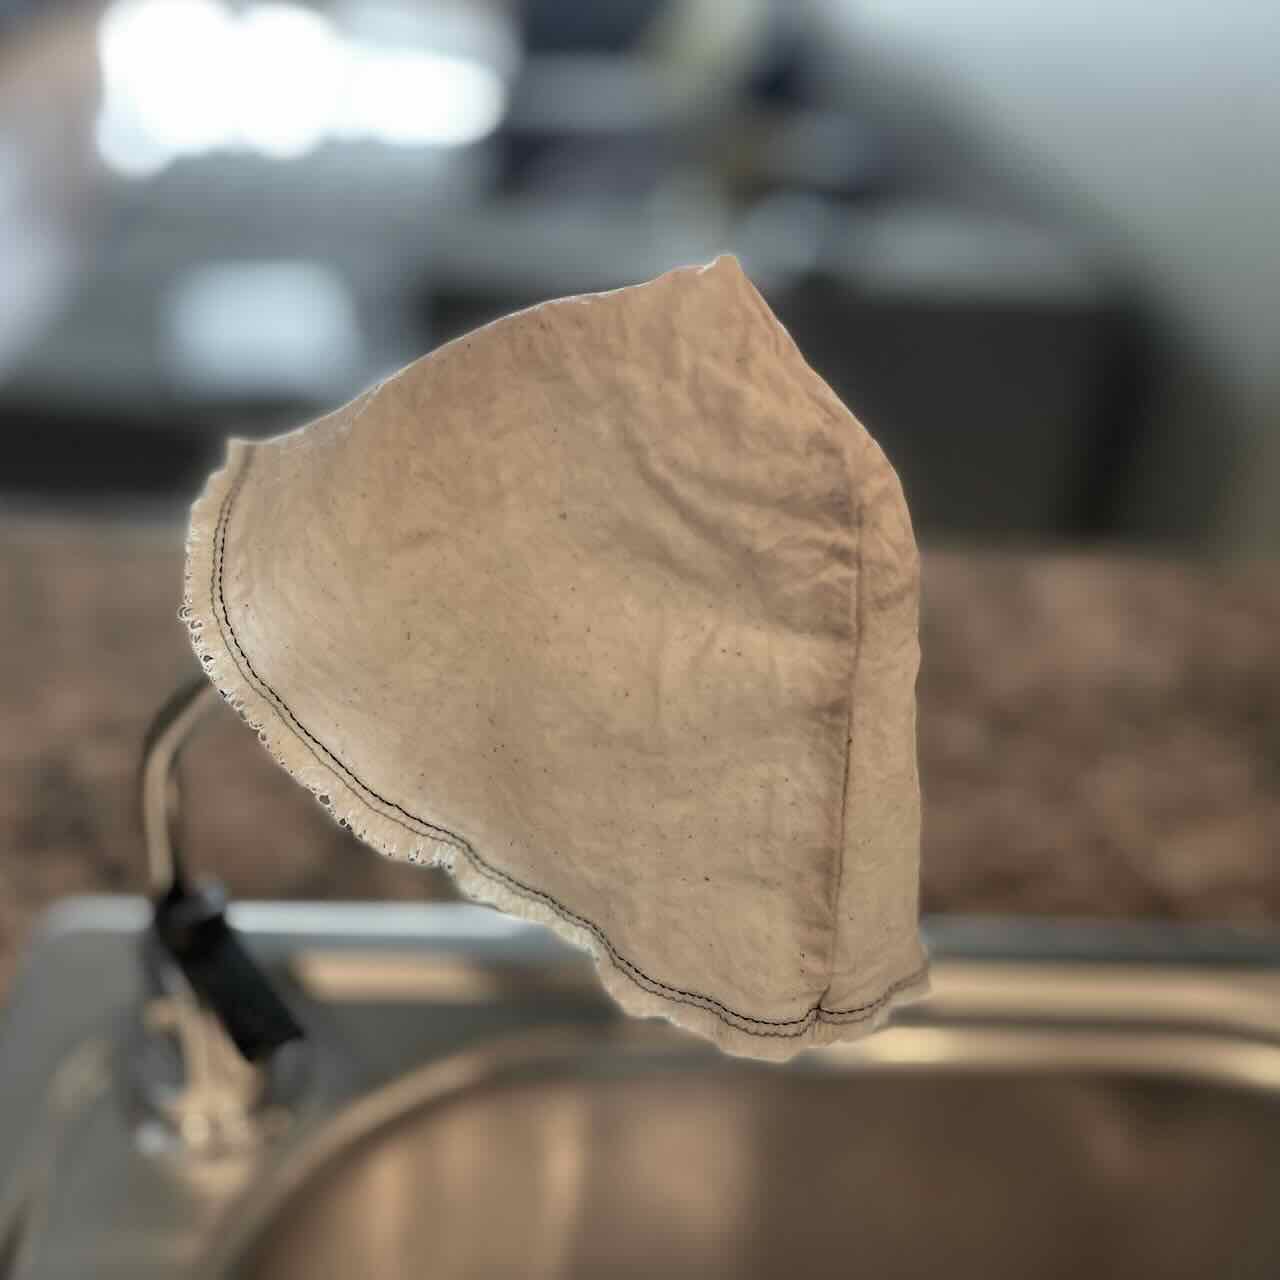 A washed coffee filter on a sink